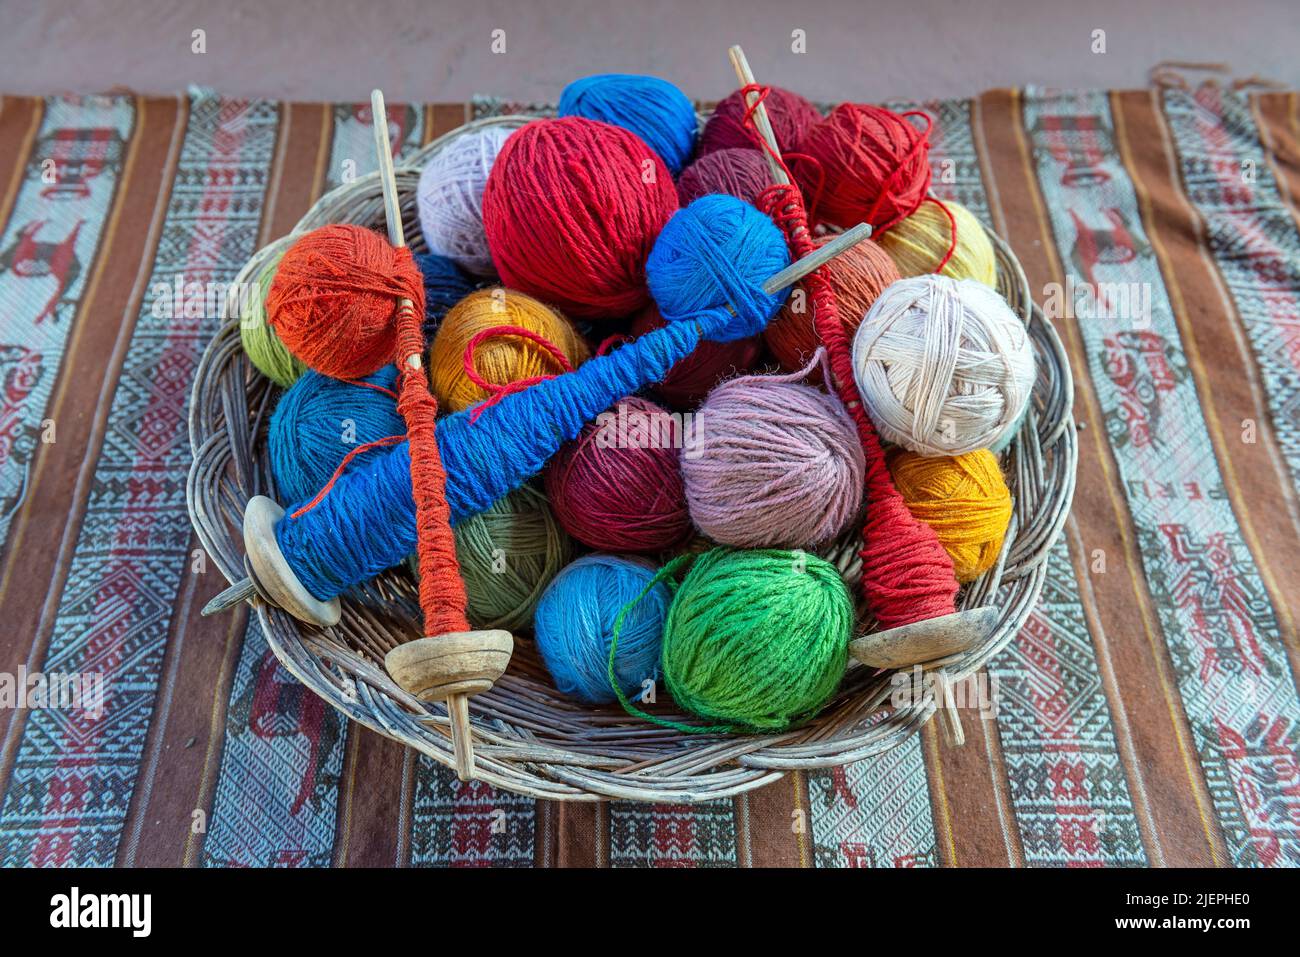 Top view of a basket with alpaca wool yarn balls and spinning spindles in a textile production center in Cusco, Peru. Stock Photo